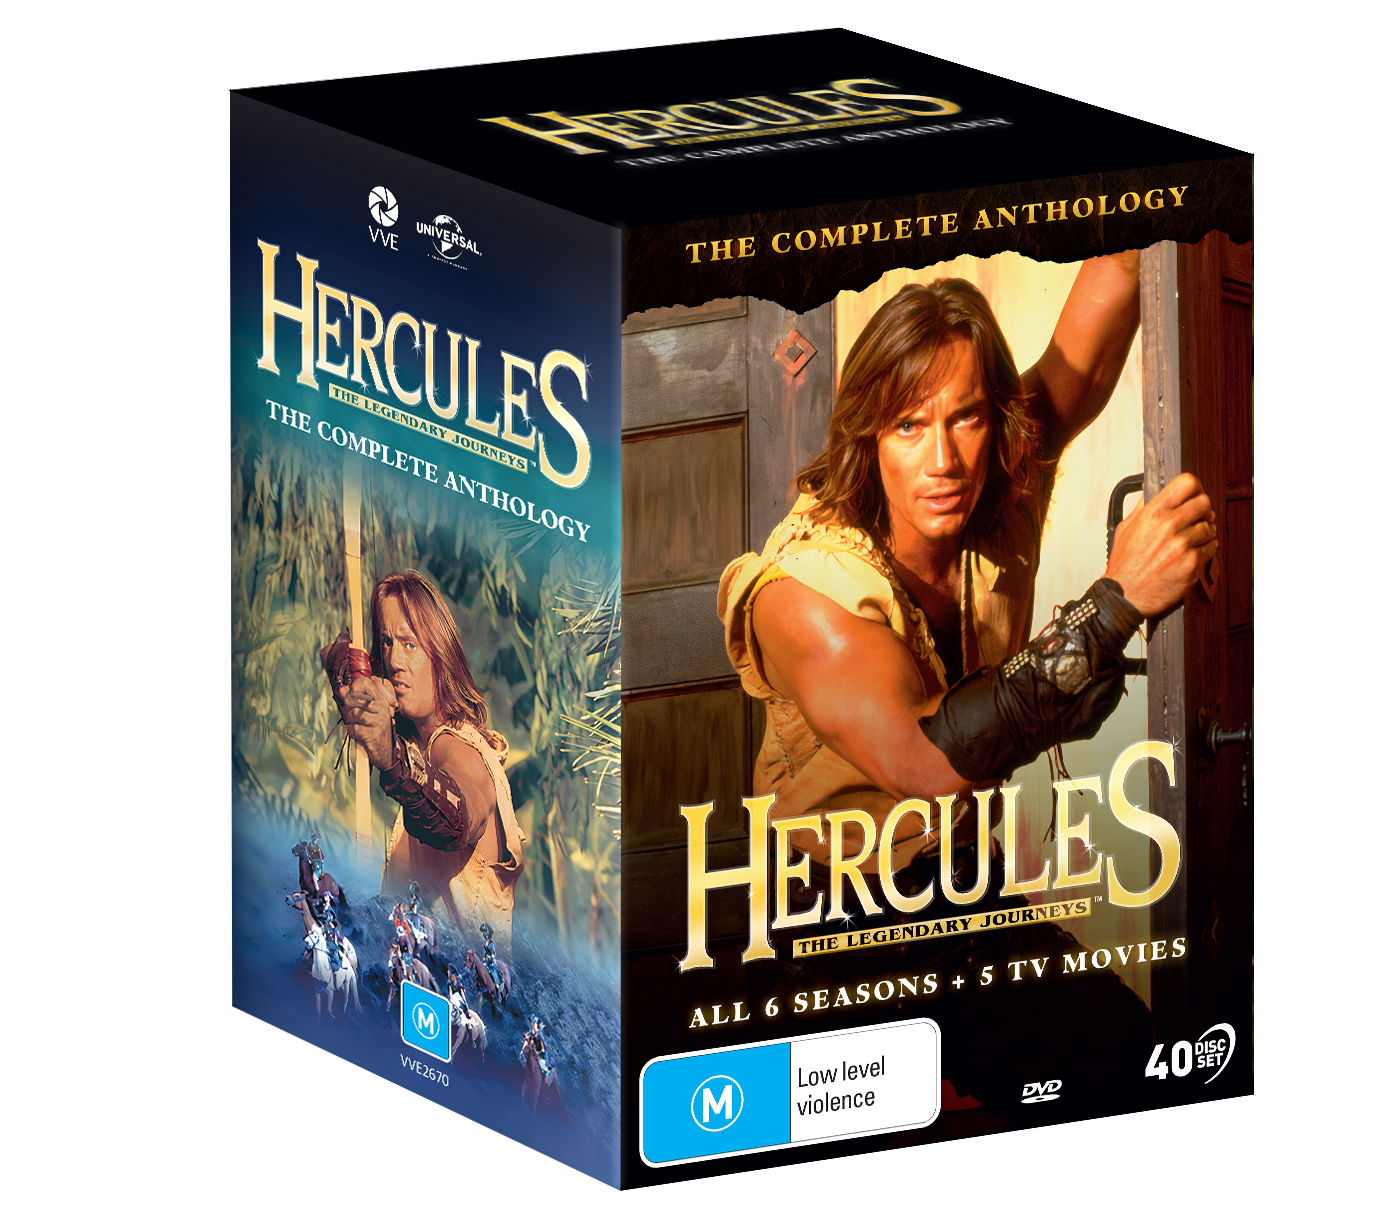 Hercules The Complete Anthology | Via Vision Entertainment